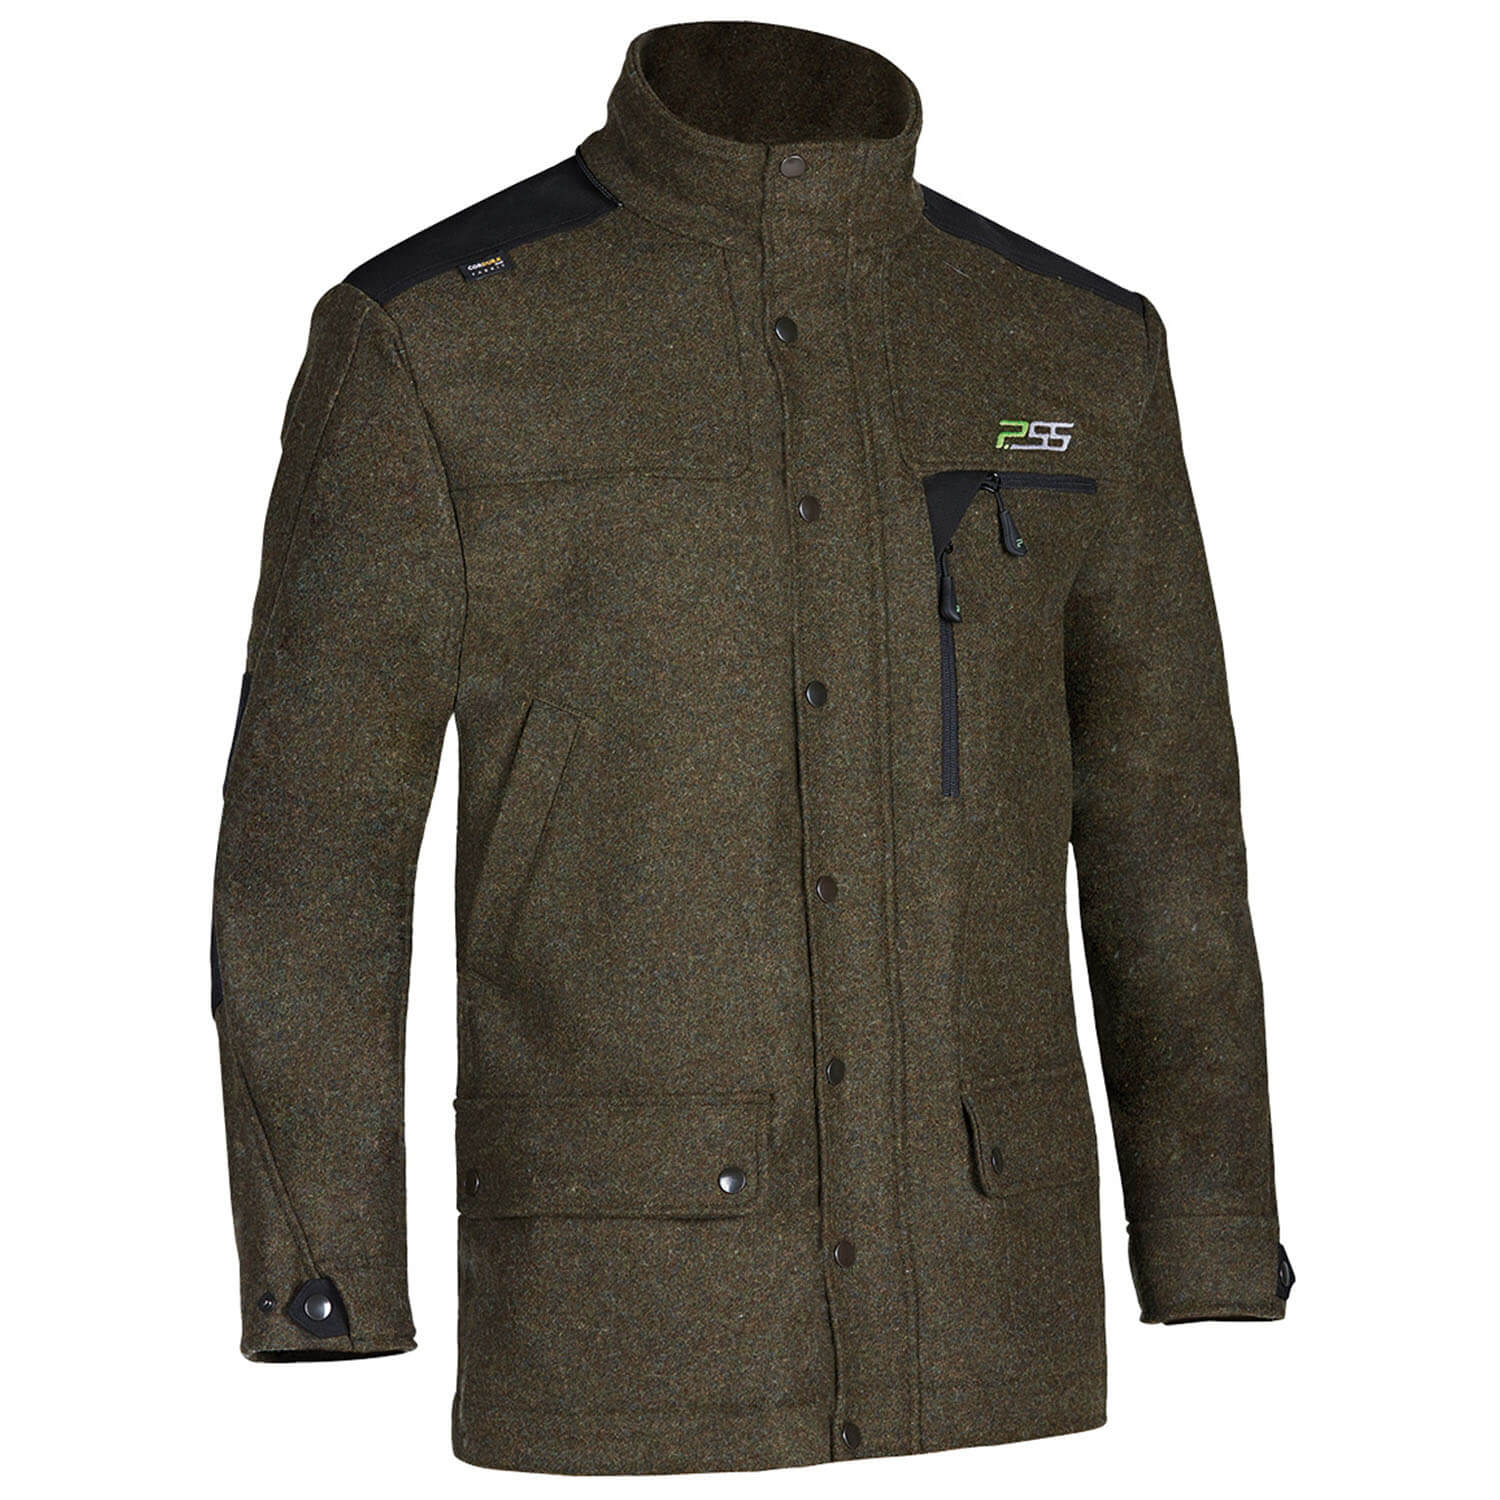  P.SS Hunting jacket Loden X-treme - Hunting Jackets